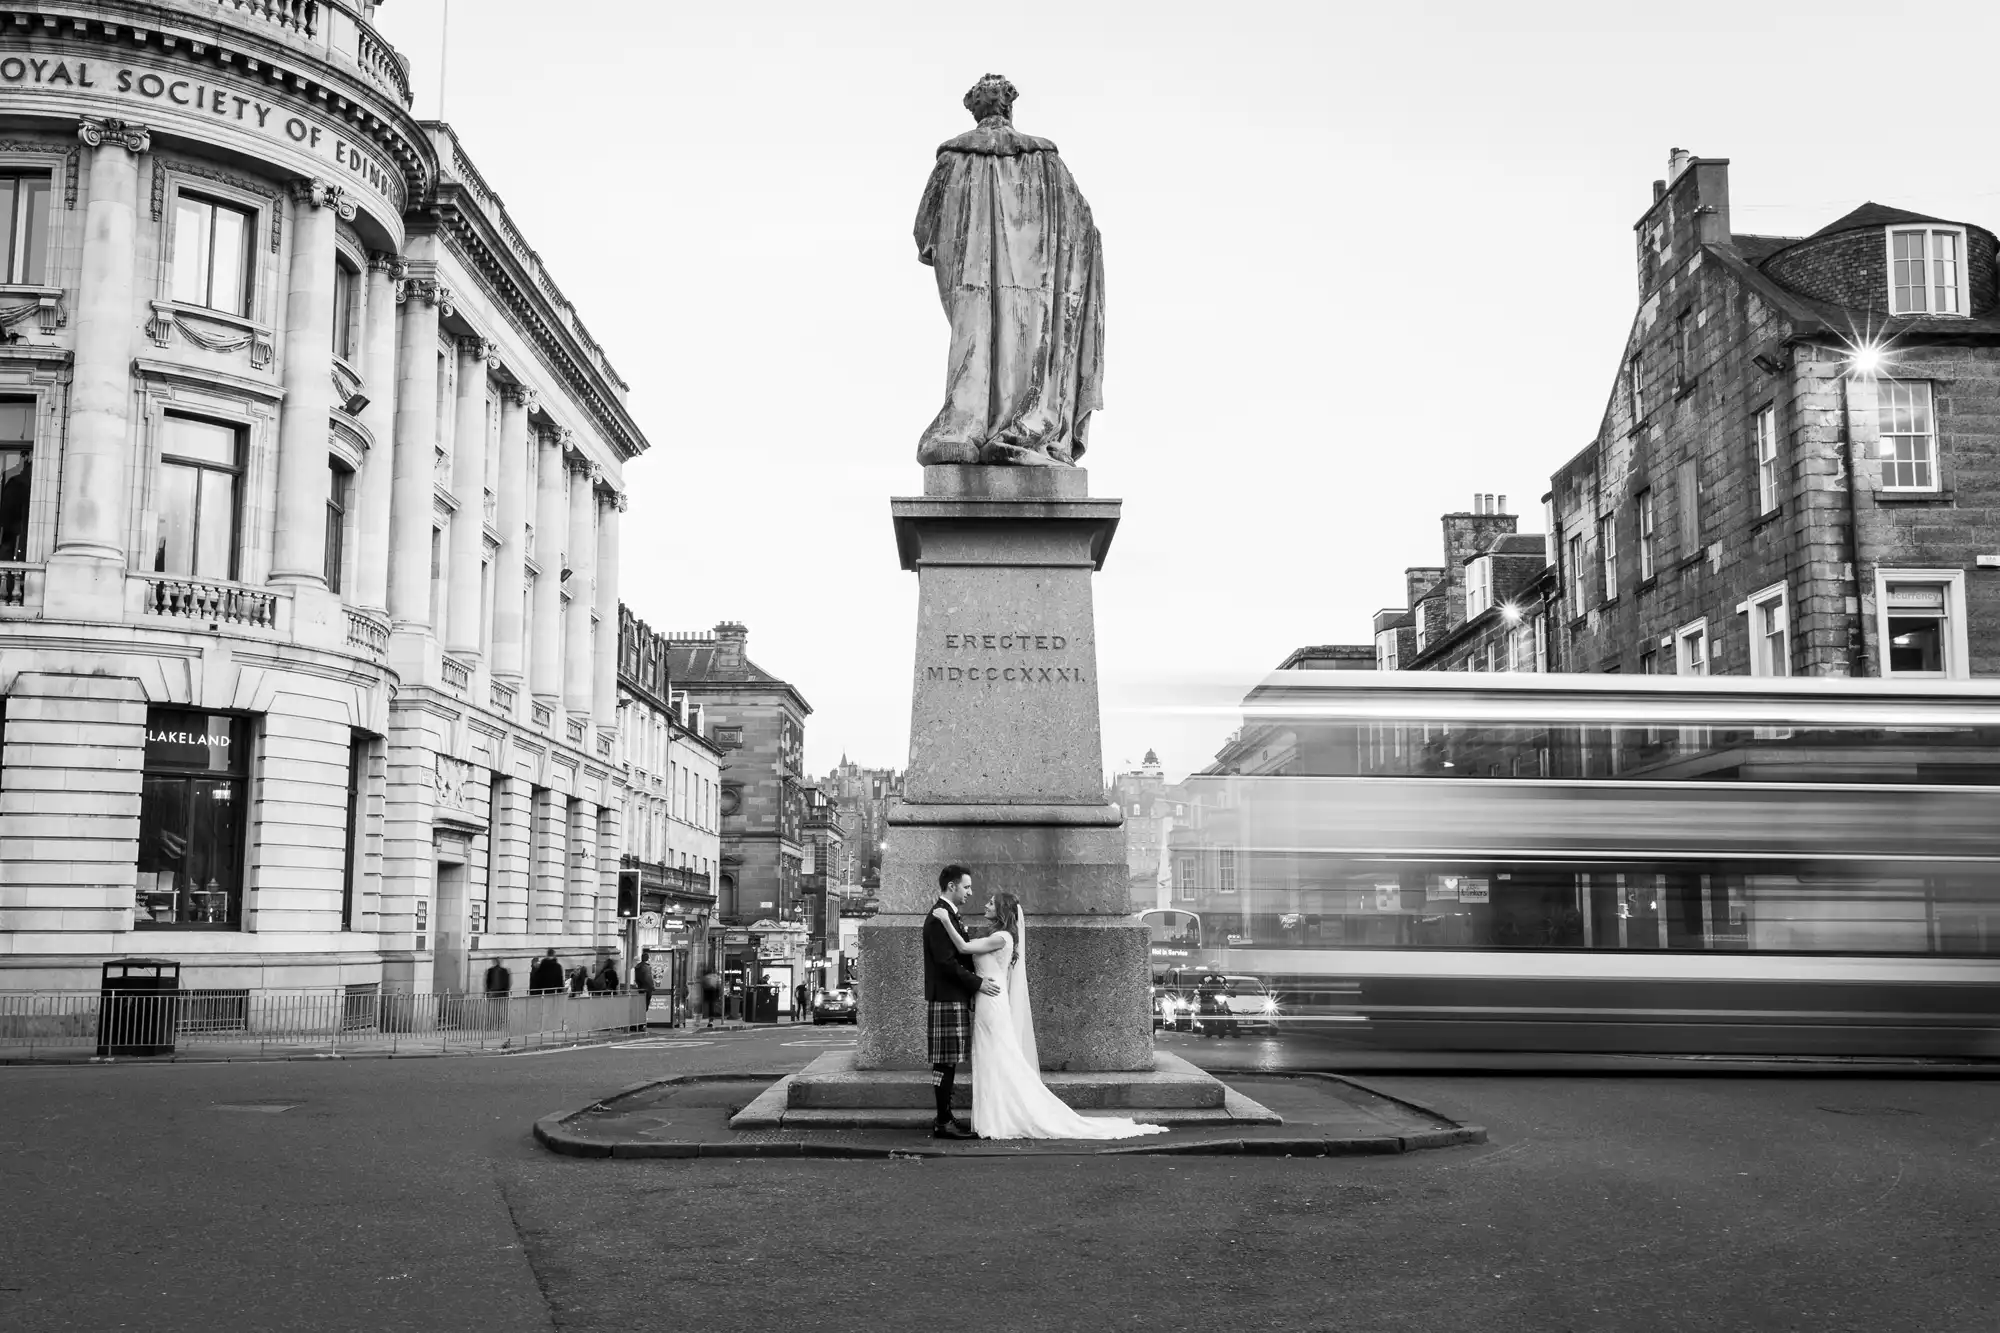 A bride and groom in wedding attire stand at the base of a large statue in a city street. A bus is captured in motion passing by them. Buildings surround the scene.